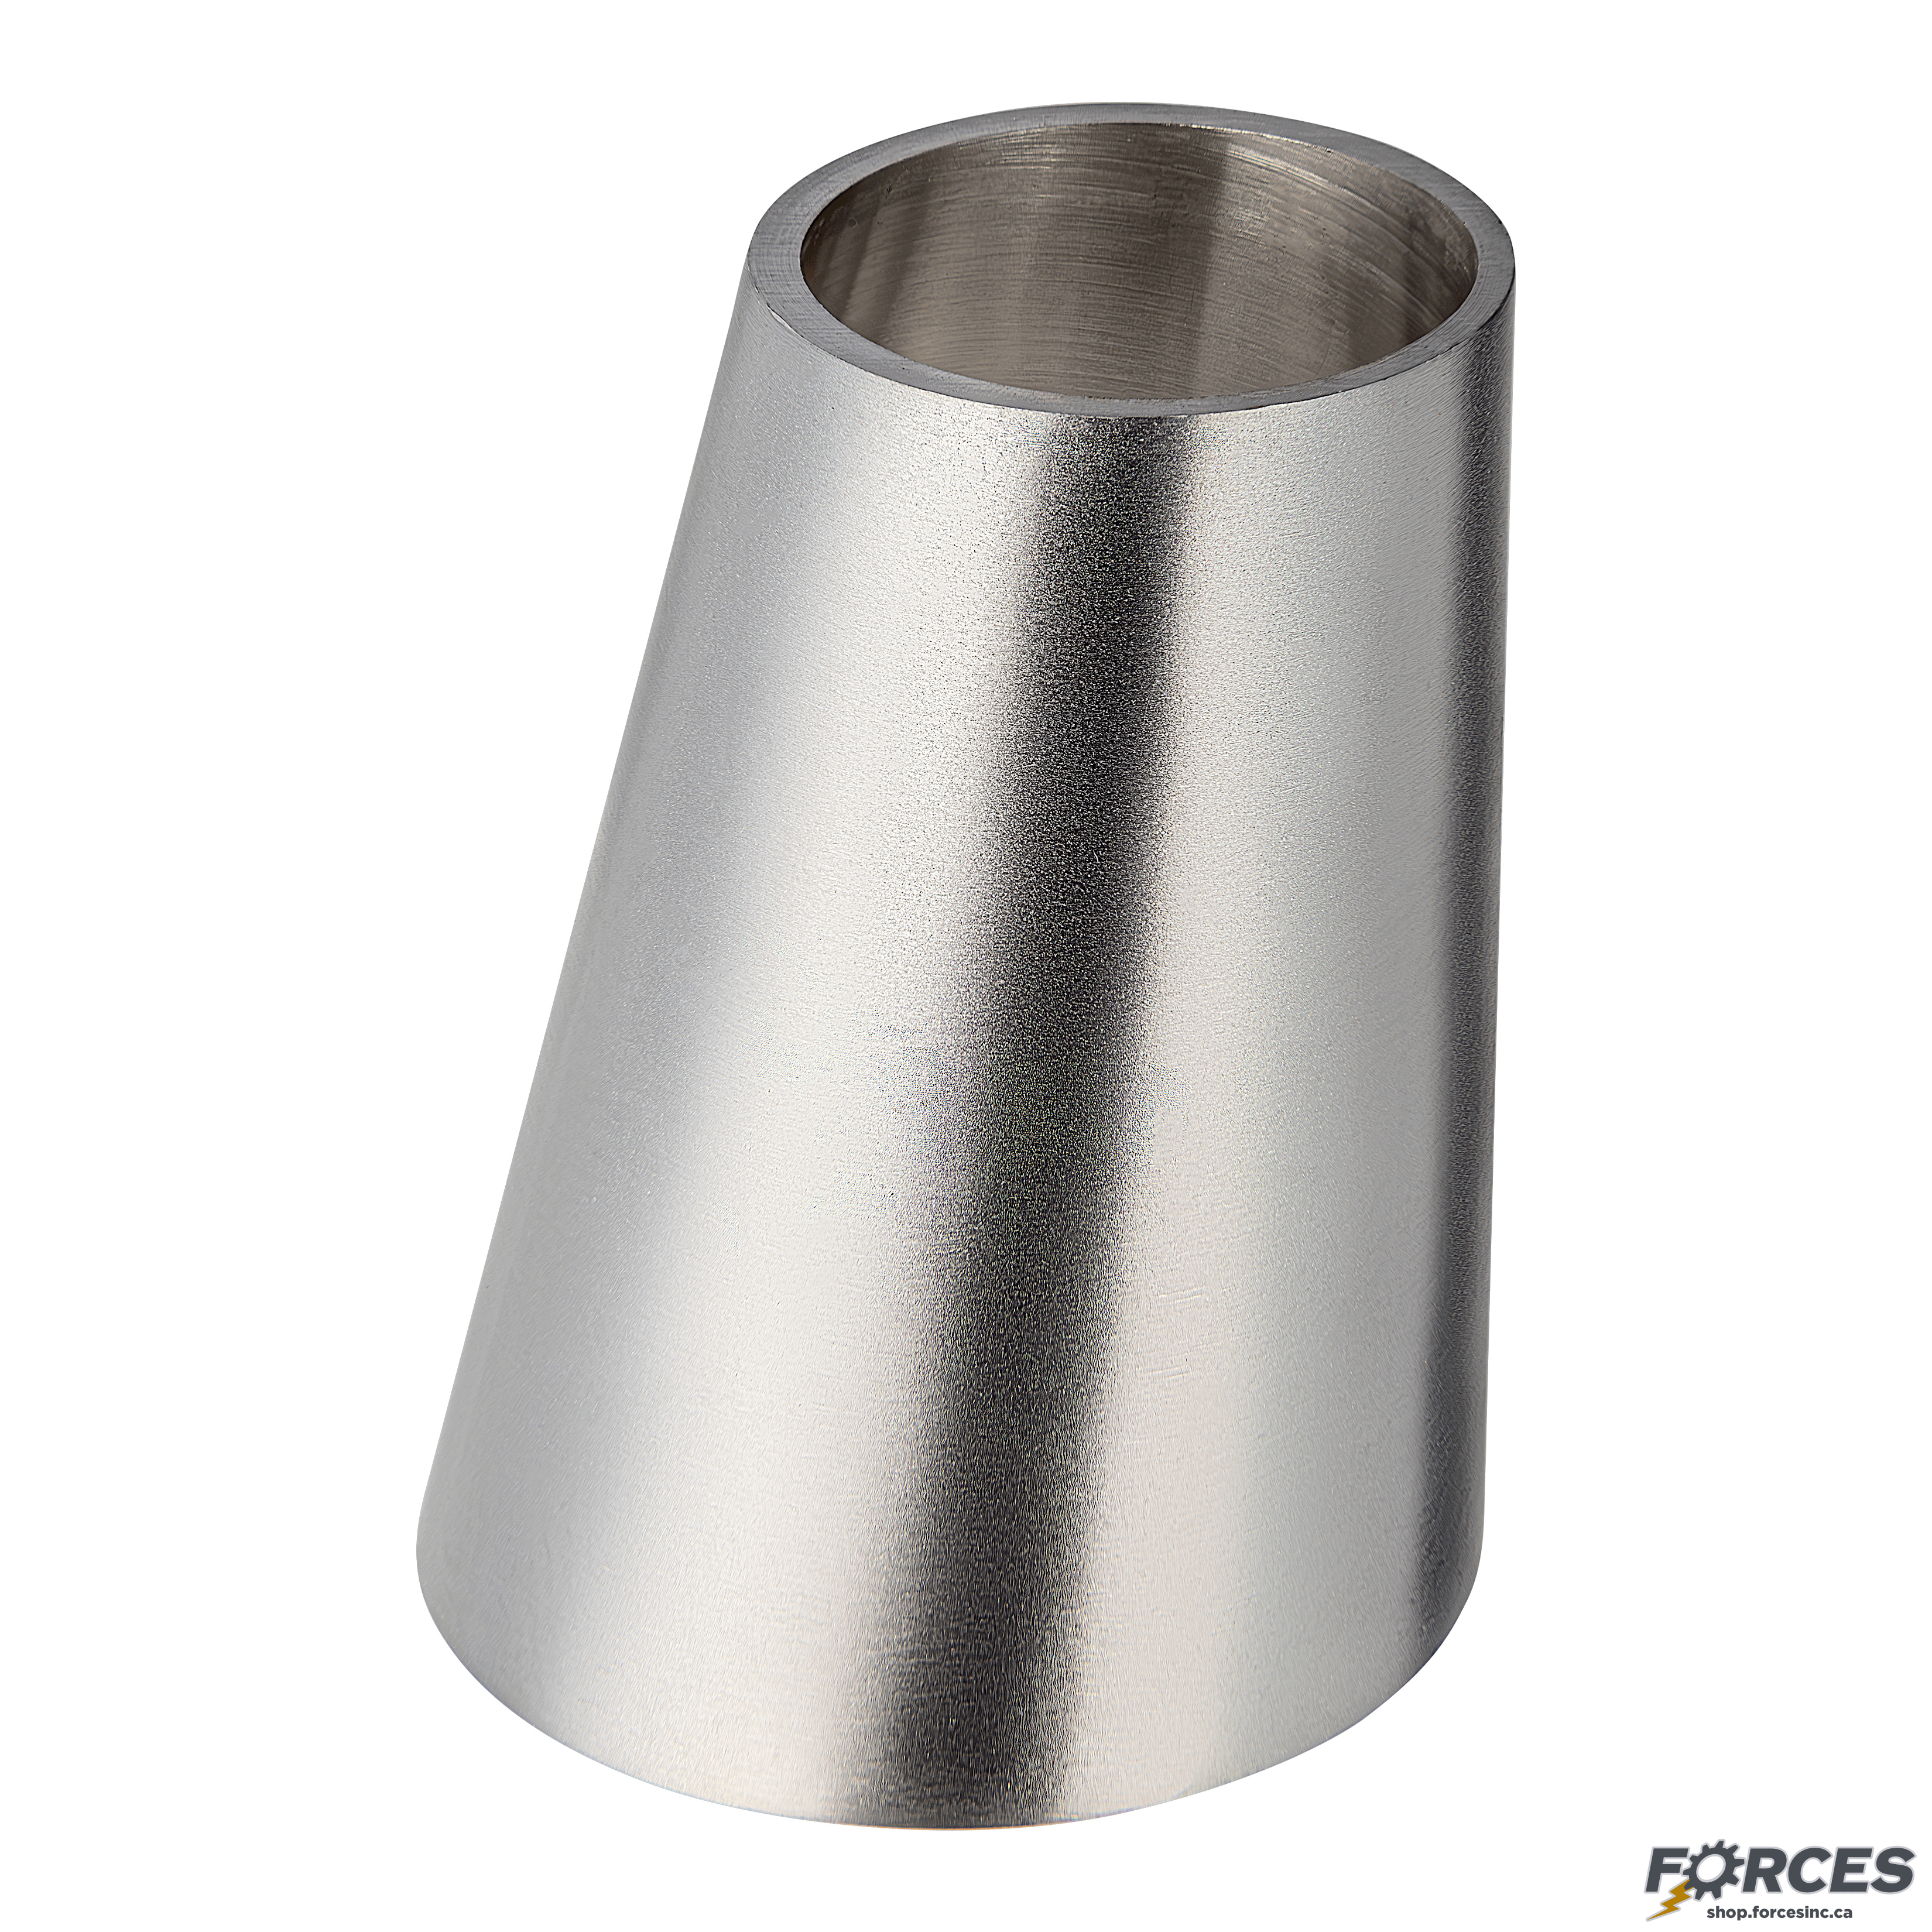 3" x 2" Butt Weld Eccentric Reducer - Stainless Steel 316 - Forces Inc